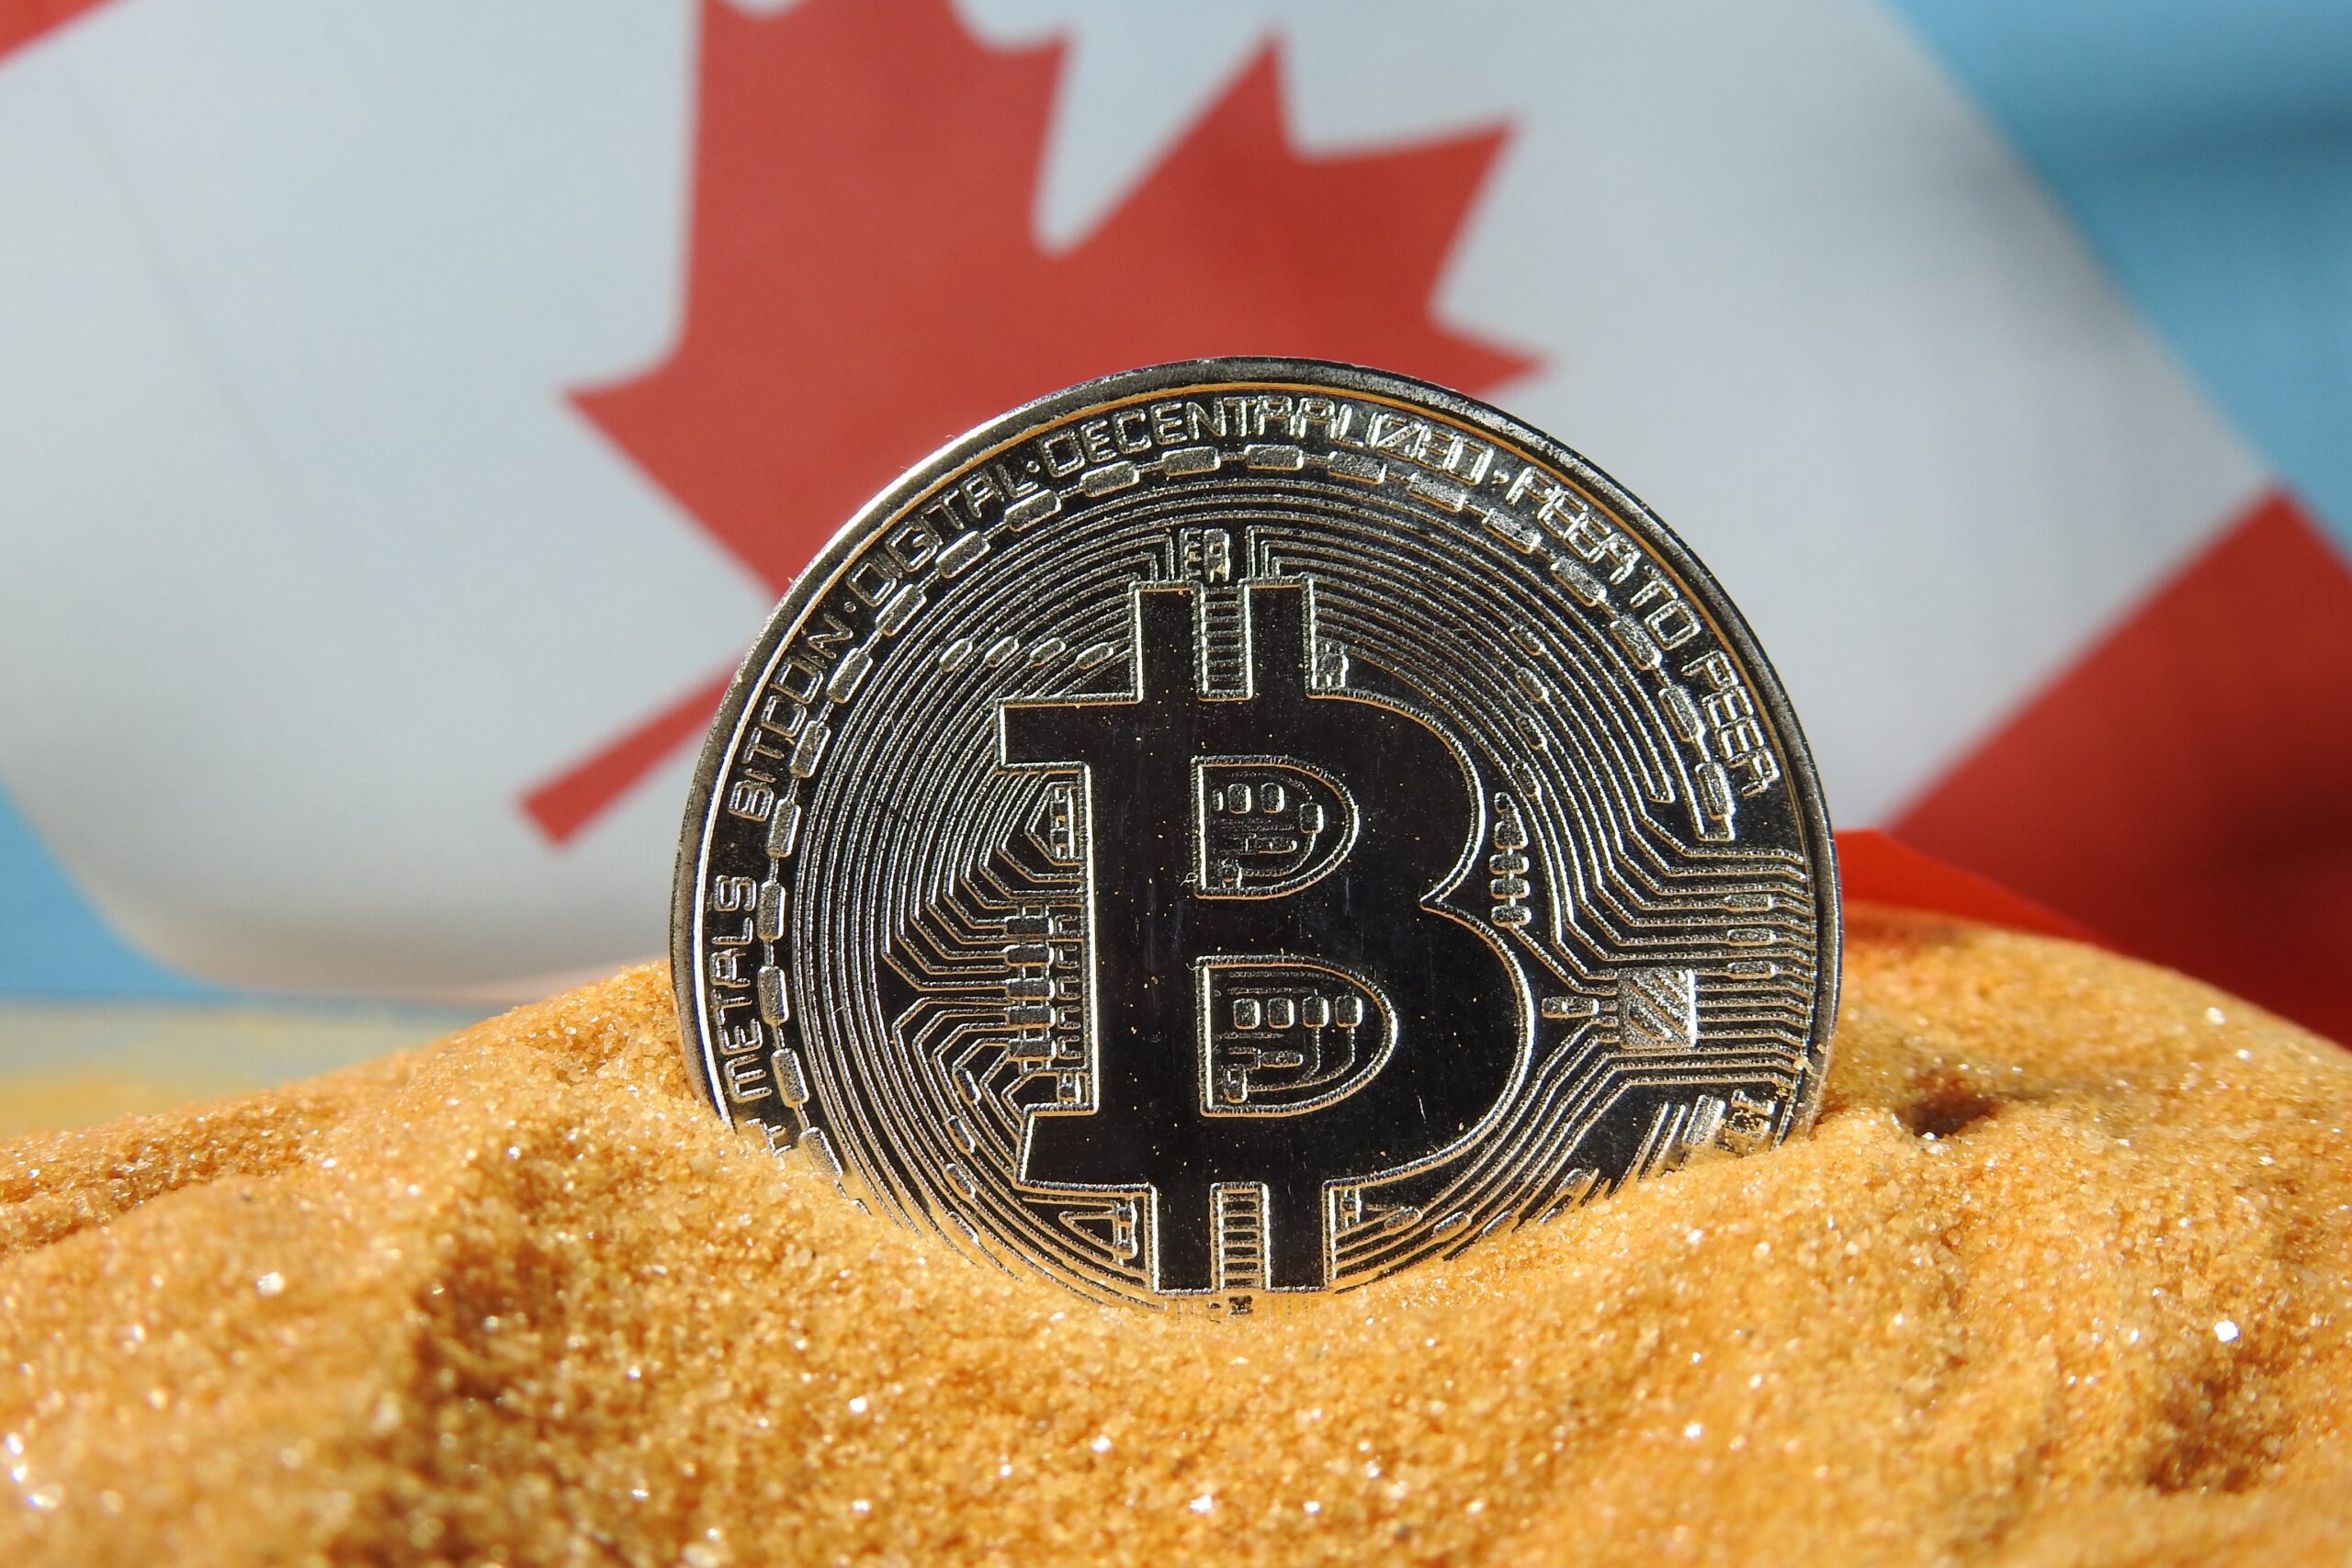 best canadian crypto exchanges